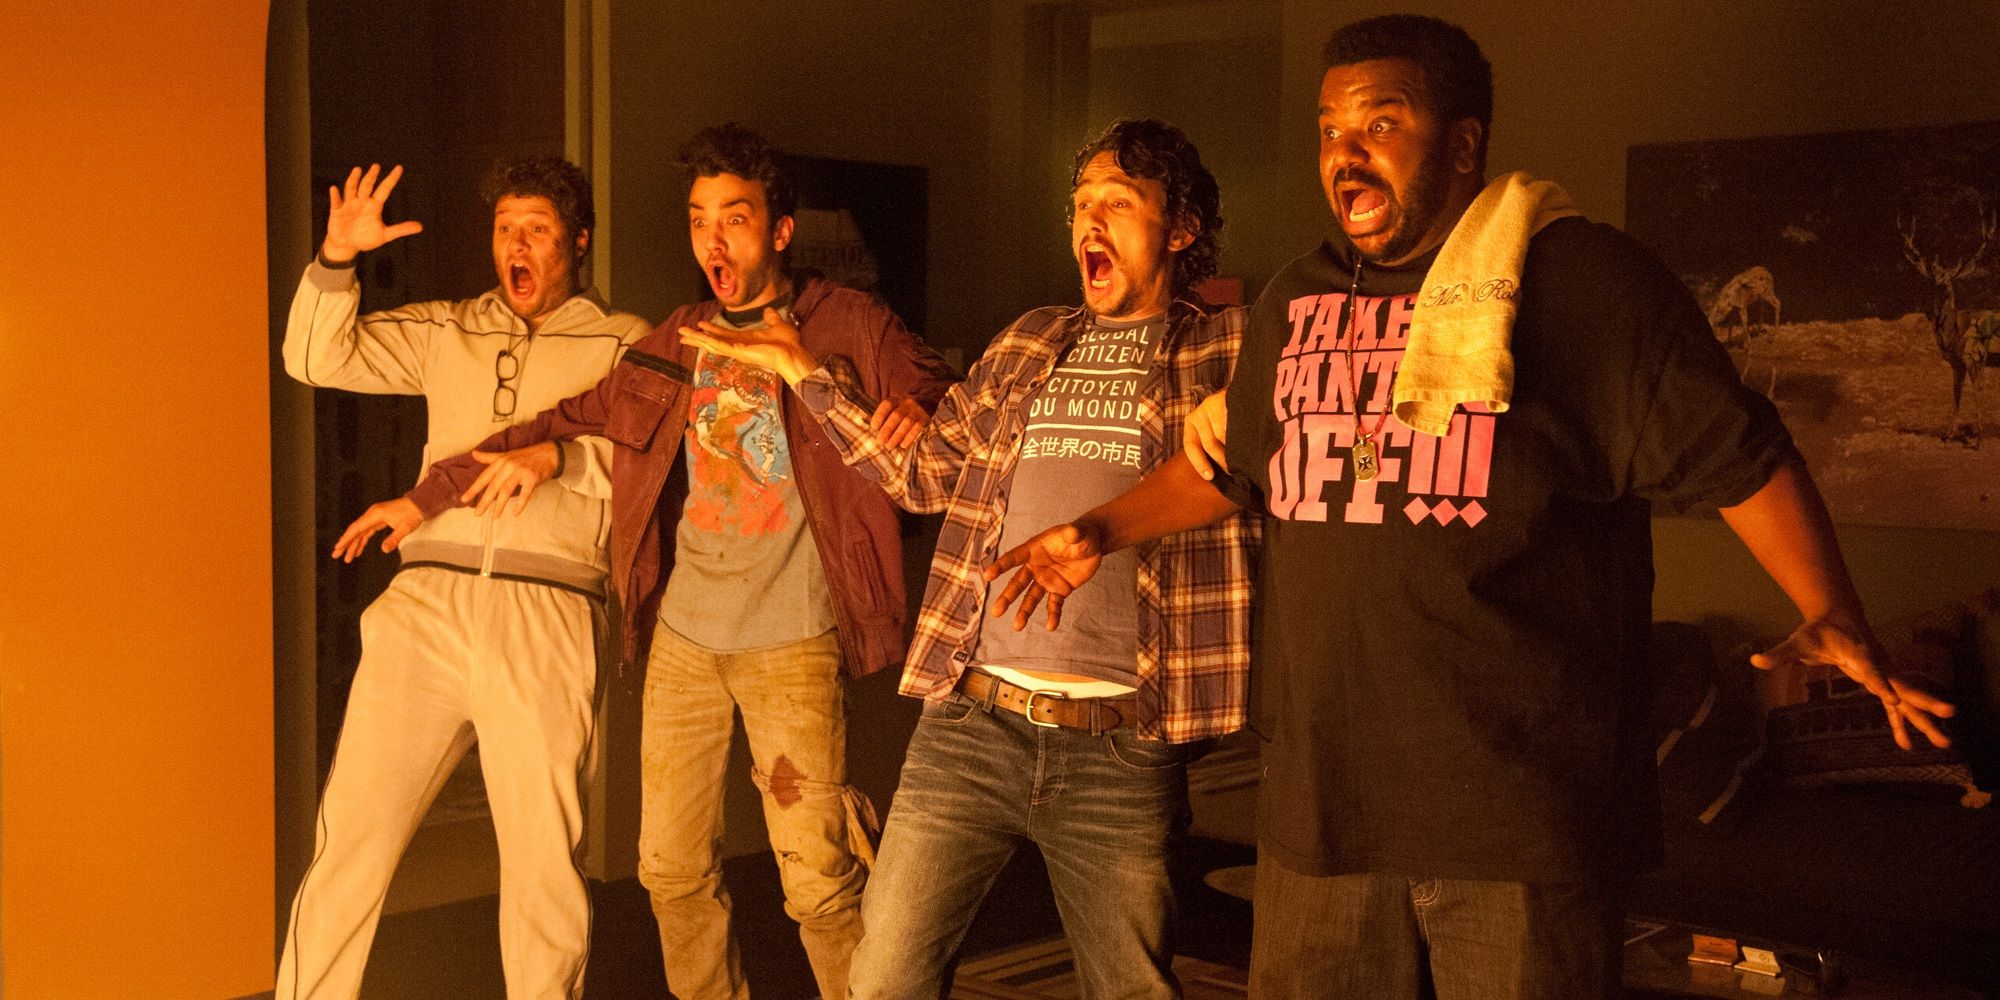 Seth Rogen, Jay Baruchel, James Franco, and Craig Robinson jumping from a fire in This is the End.